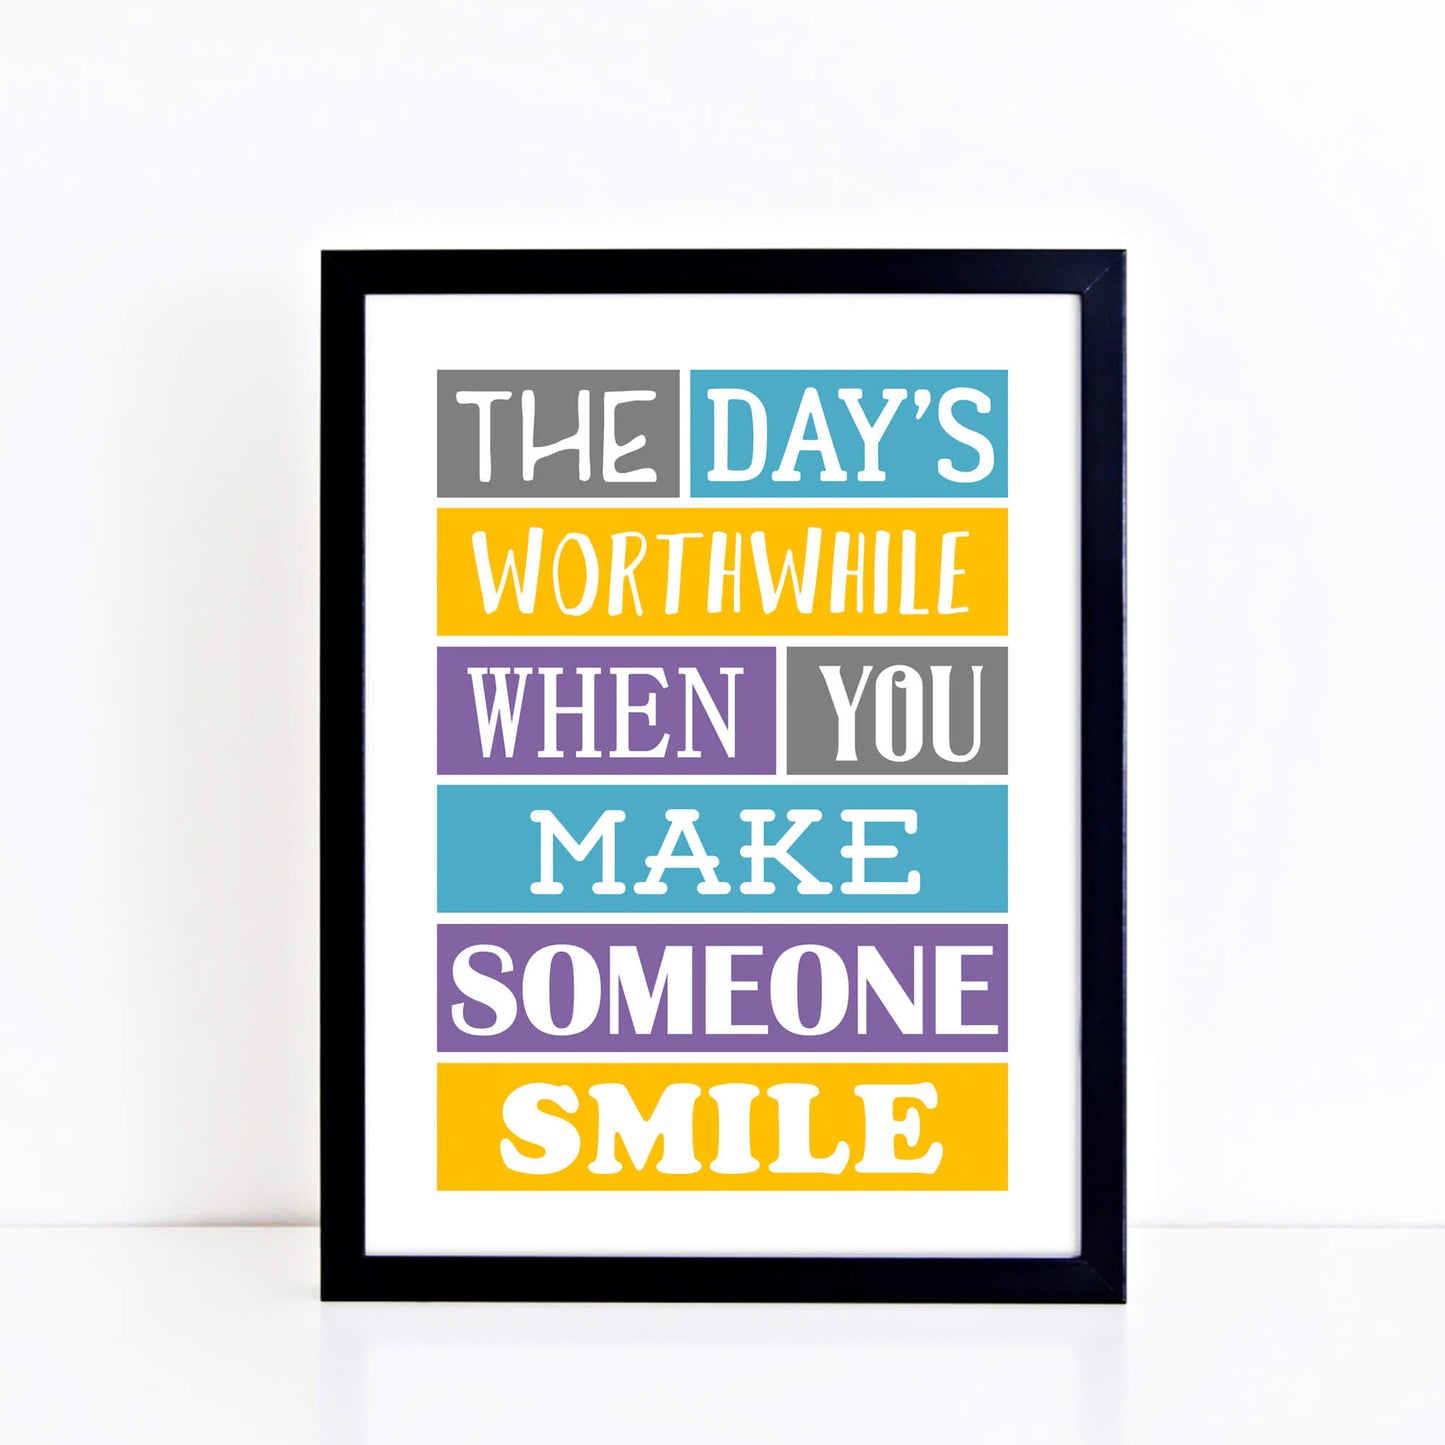 The Day's Worthwhile When You Make Someone Smile Print-SixElevenCreations-SEP0017